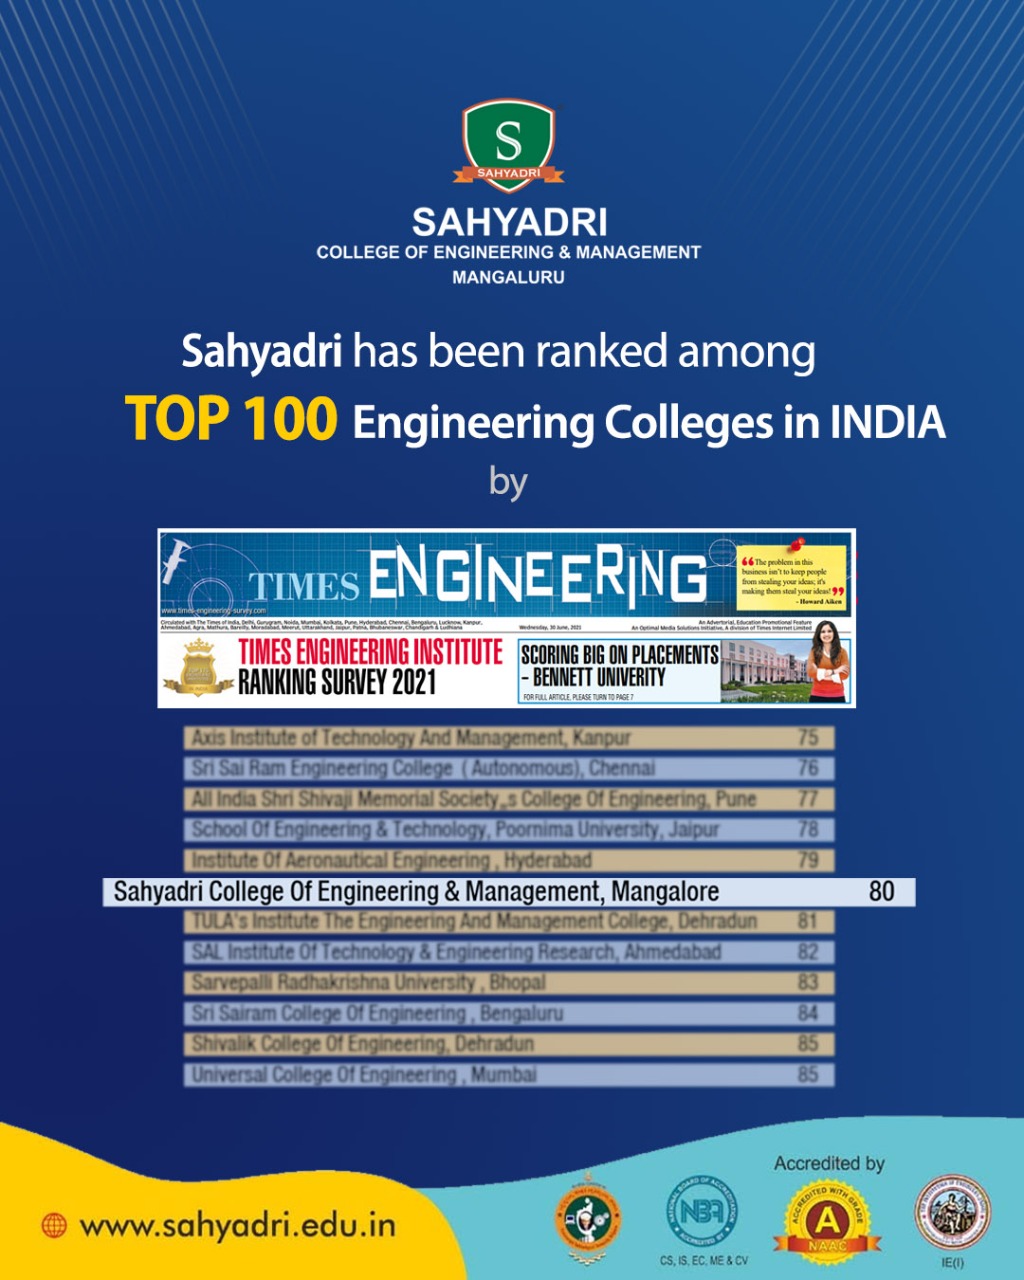 Sahyadri Ranked among Top 100 Engineering Colleges in India by Times Engineering Institute Ranking Survey 2021